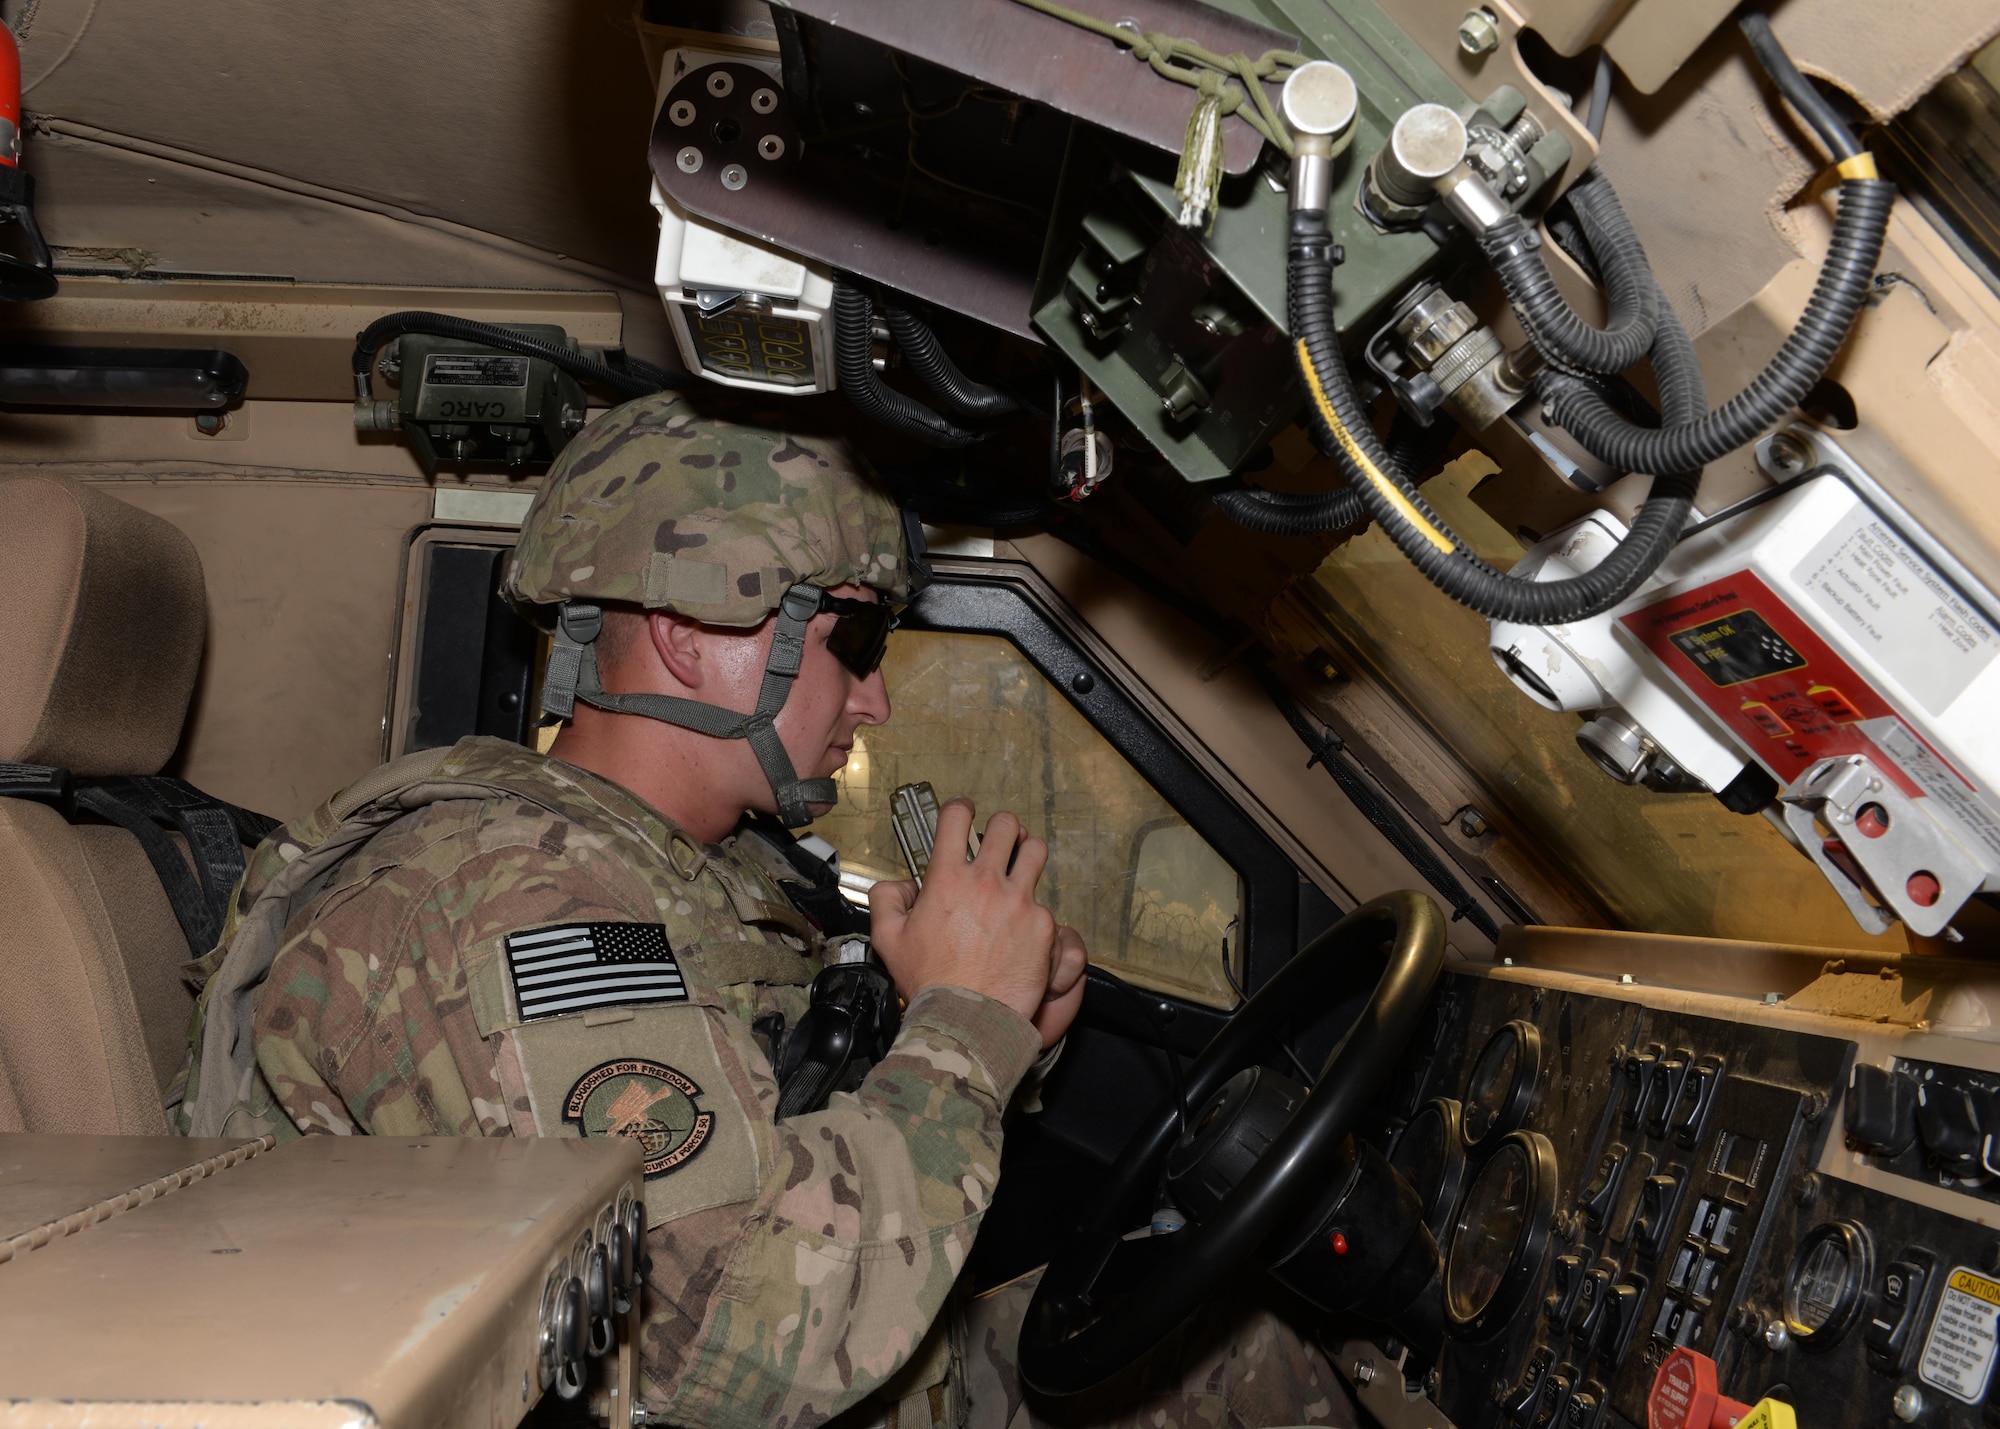 U.S. Air Force Senior Airman Tyler Simpson, 455th Expeditionary Security Forces Squadron combat patrolman, sits in a Mine-Resistant Ambush Protected vehicle awaiting instruction May, 29, 2015, at Bagram Air Field, Afghanistan.  Simpson, who’s duties of protecting the base include, flight line entry control checker, flight line security patrolman and first responder to all incidents on the base, is part of the last few ‘thousand’ Airmen here that have a hand in delivering technology and courage to protect the base and our Afghans partners. (U.S. Air Force photo by Senior Airman Cierra Presentado/Released)